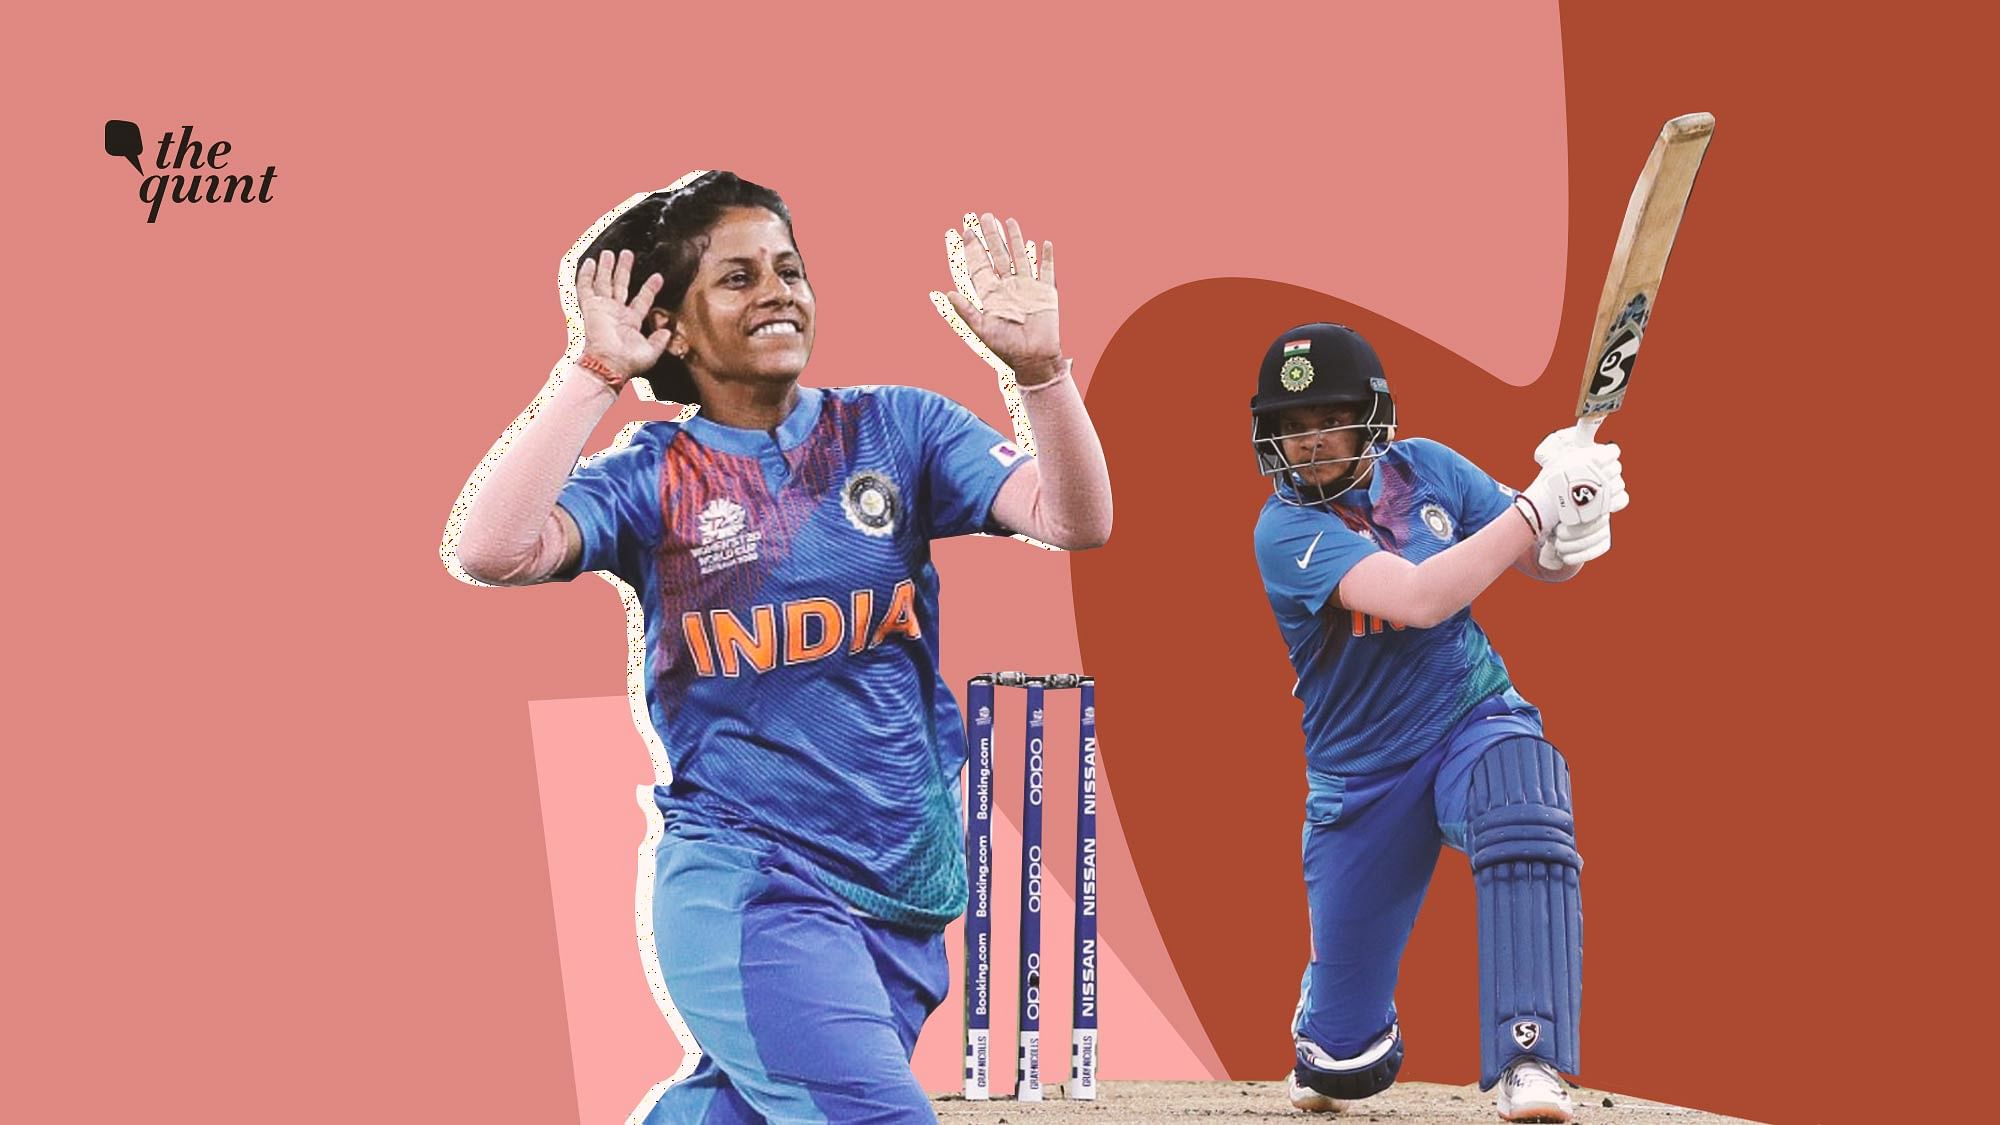 Poonam Yadav is the only Indian to feature in 2020 ICC Women T20 World Cup team while Shafali Verma was the 12 player in the side.